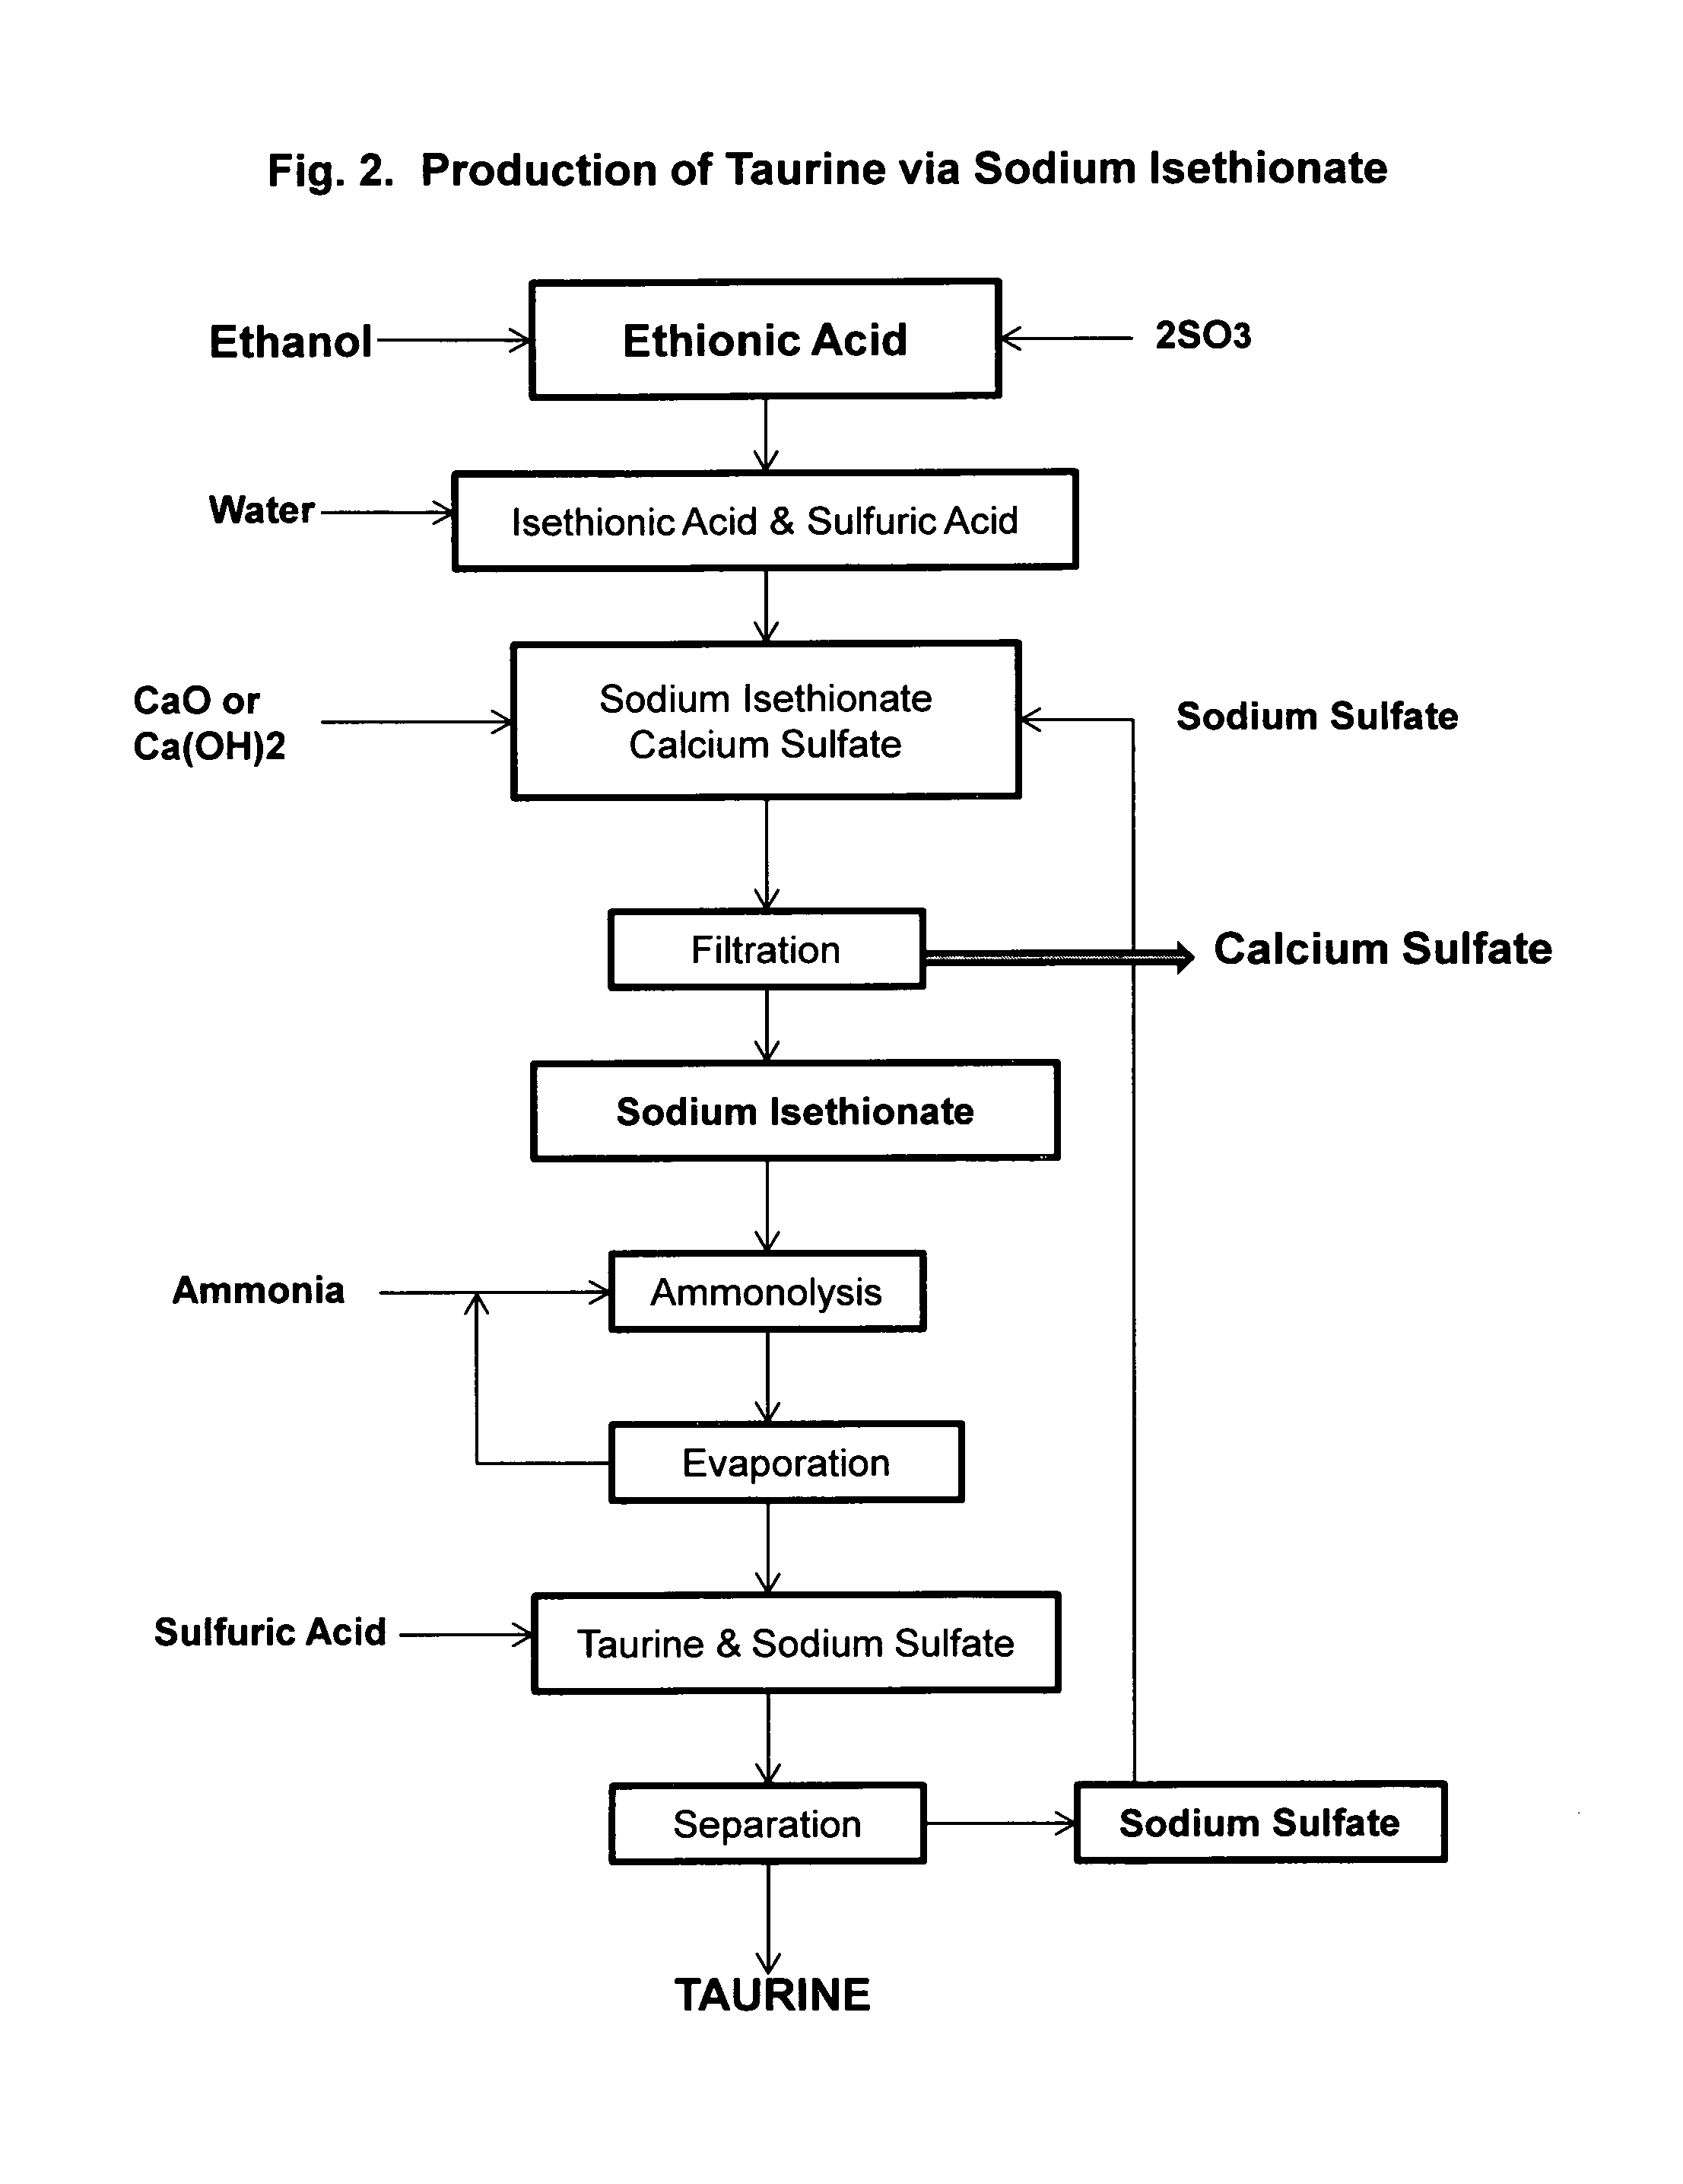 Process for the production of taurine from ethanol